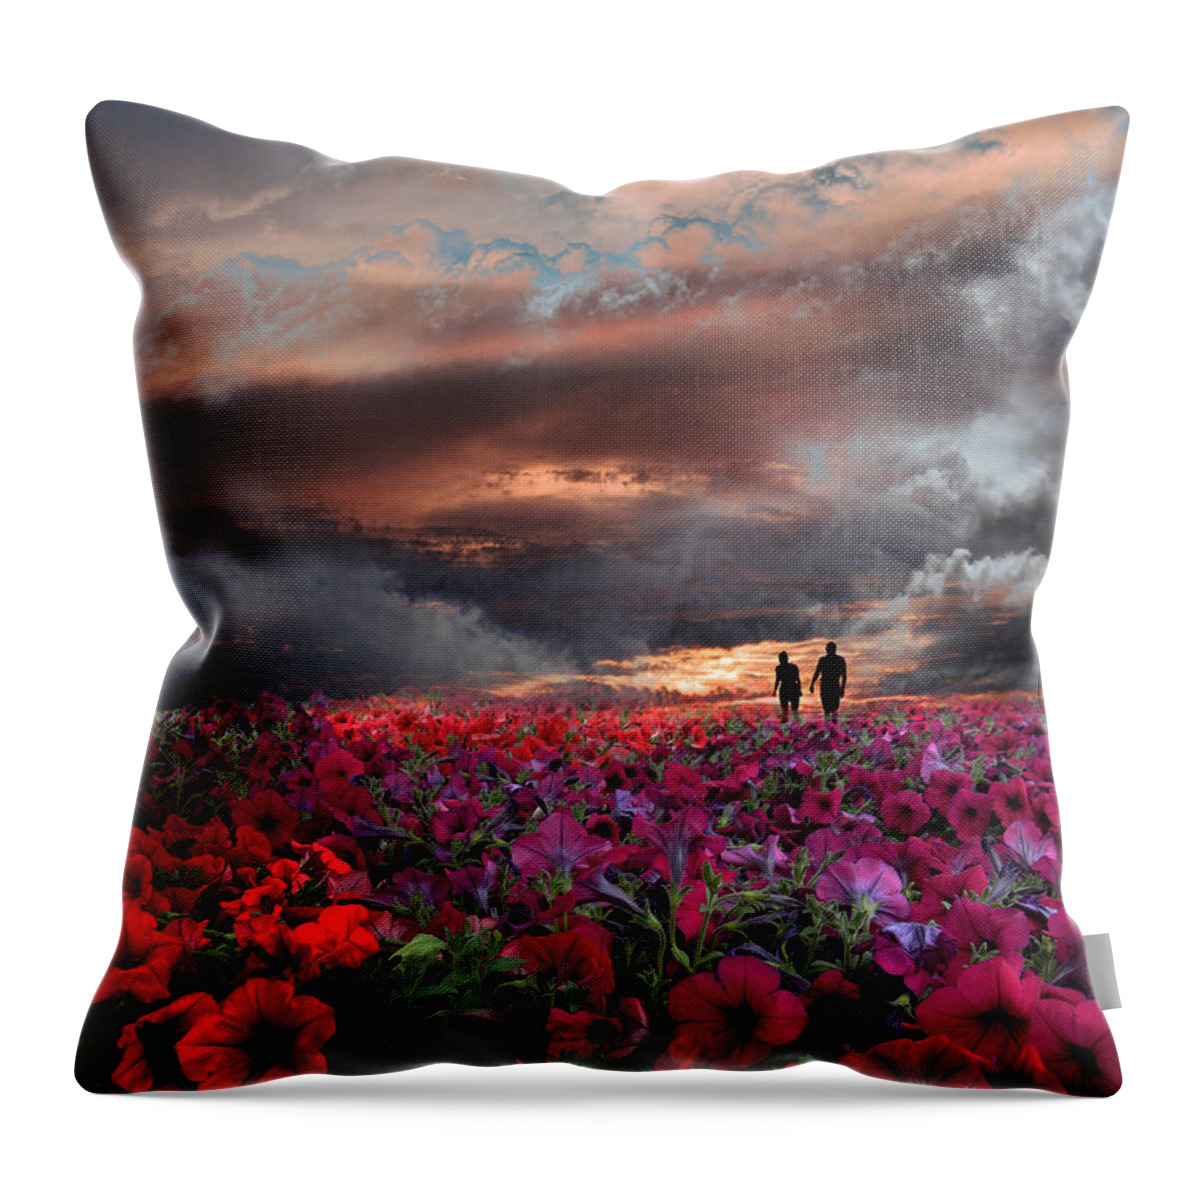 Flowers Throw Pillow featuring the photograph 4087 by Peter Holme III